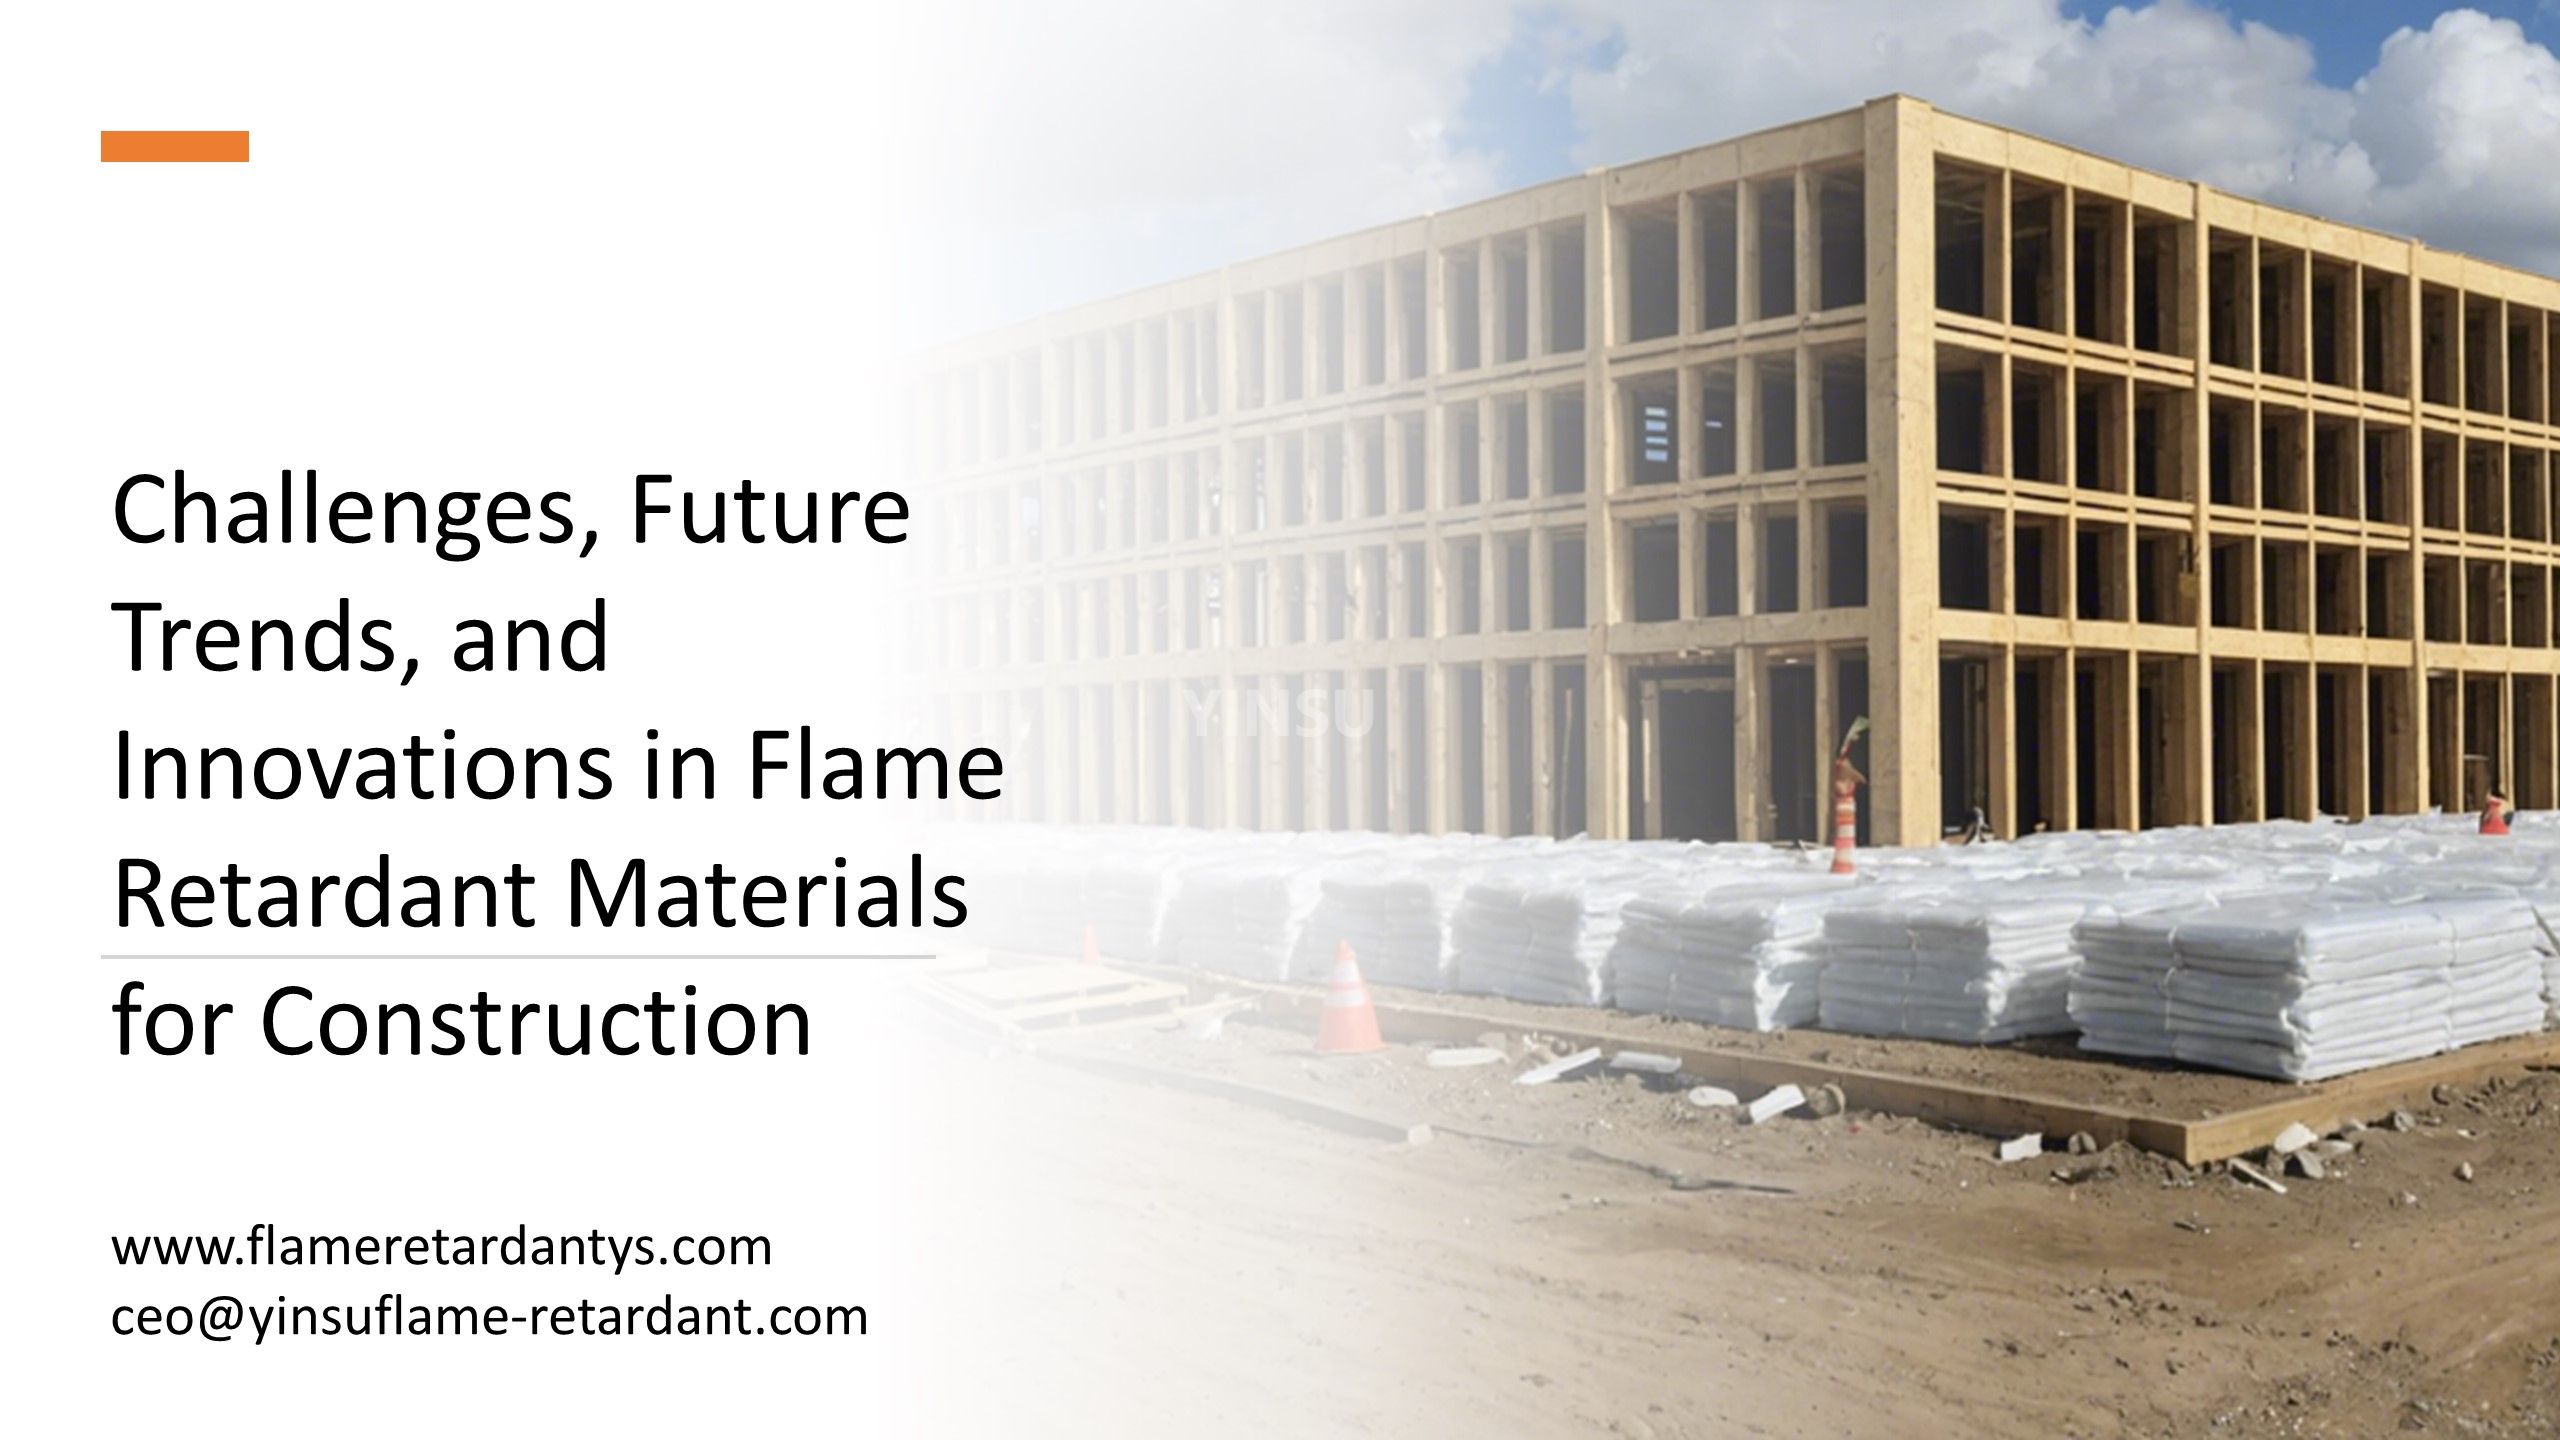 8.12 Challenges, Future Trends, and Innovations in Flame Retardant Materials for Construction